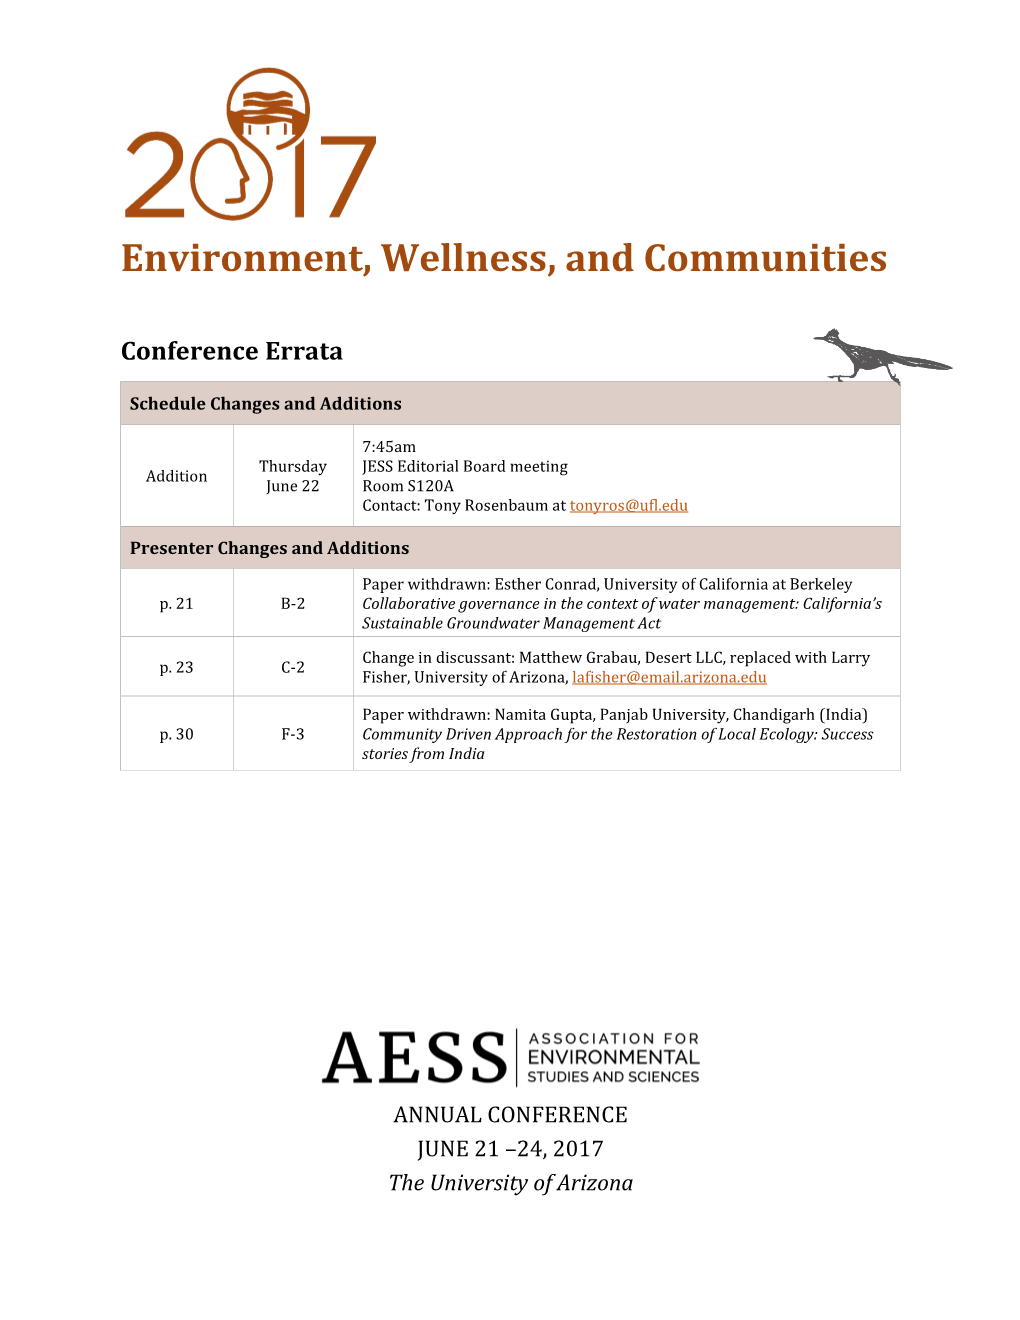 AESS 2017! to Me, Each Year the AESS Conference Is an Opportunity to Meet with Old Friends and Discover New Ones